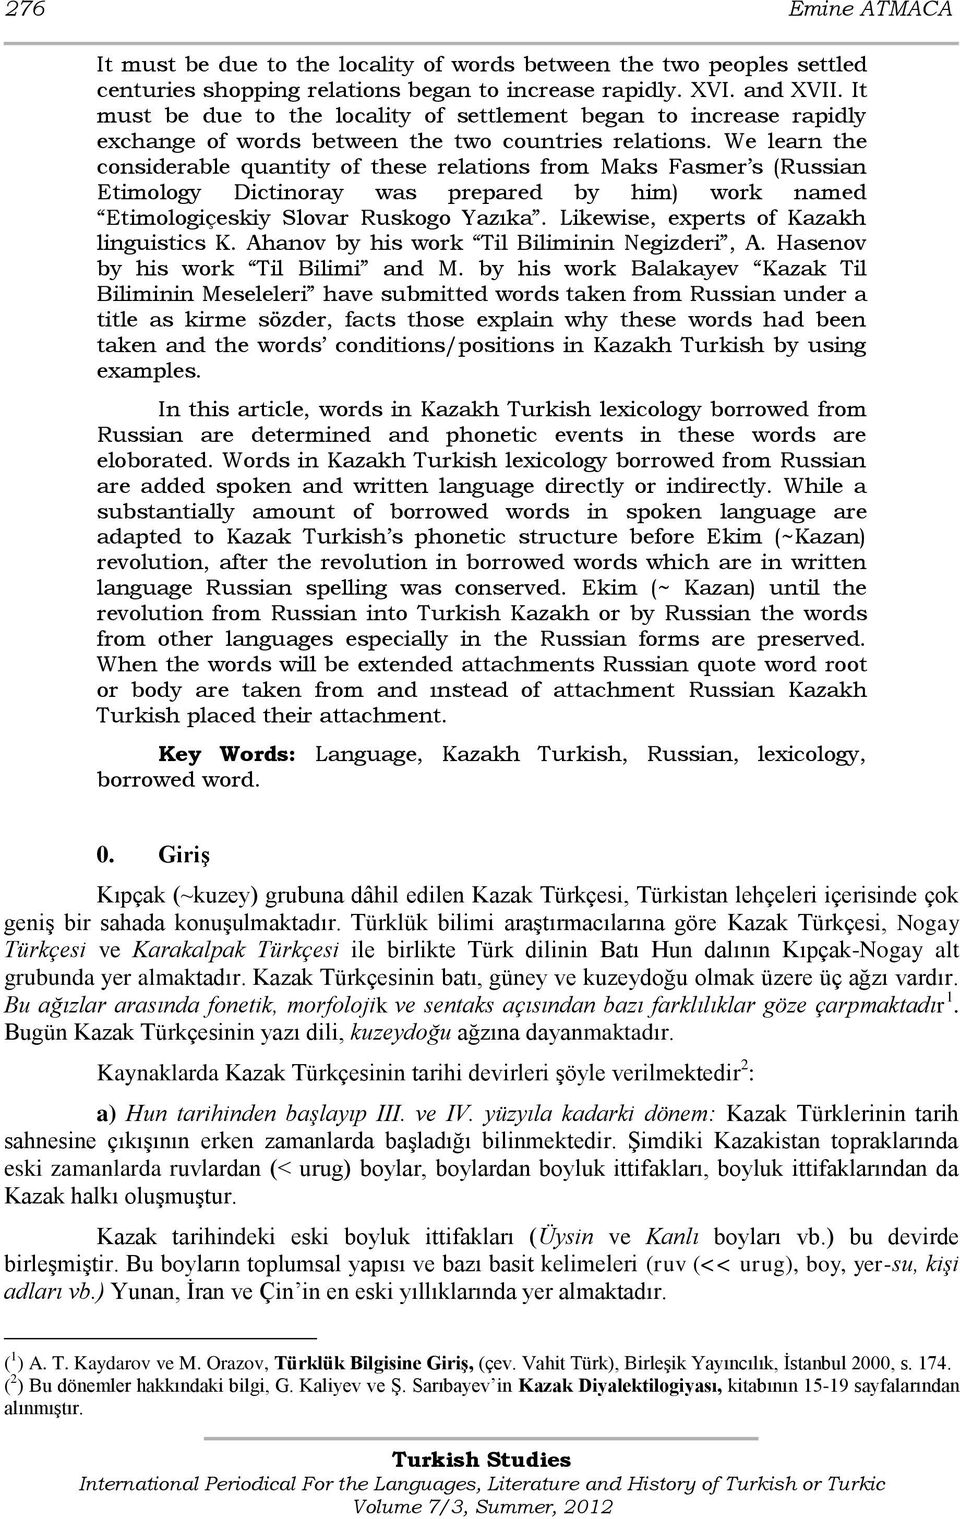 We learn the considerable quantity of these relations from Maks Fasmer s (Russian Etimology Dictinoray was prepared by him) work named Etimologiçeskiy Slovar Ruskogo Yazıka.